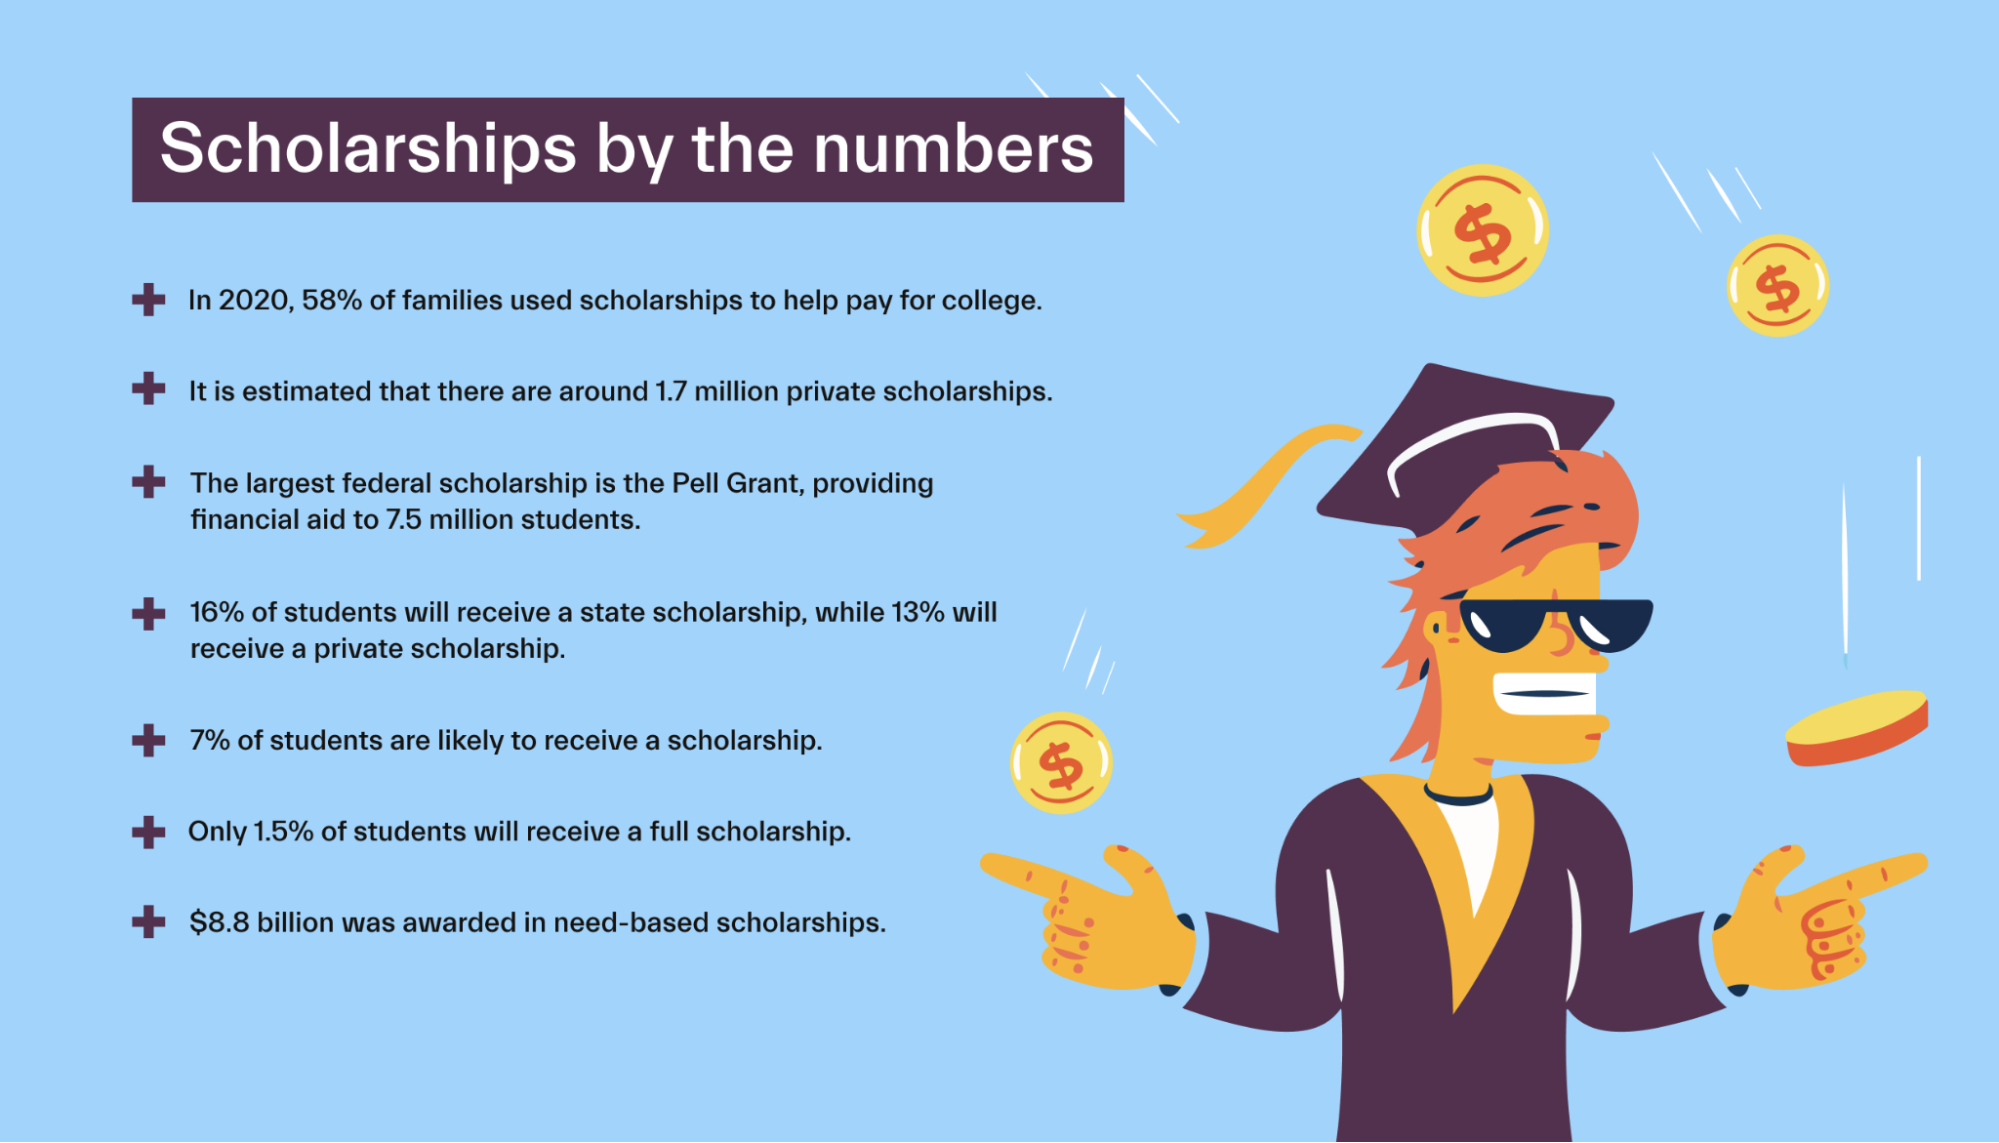 Scholarships by the numbers